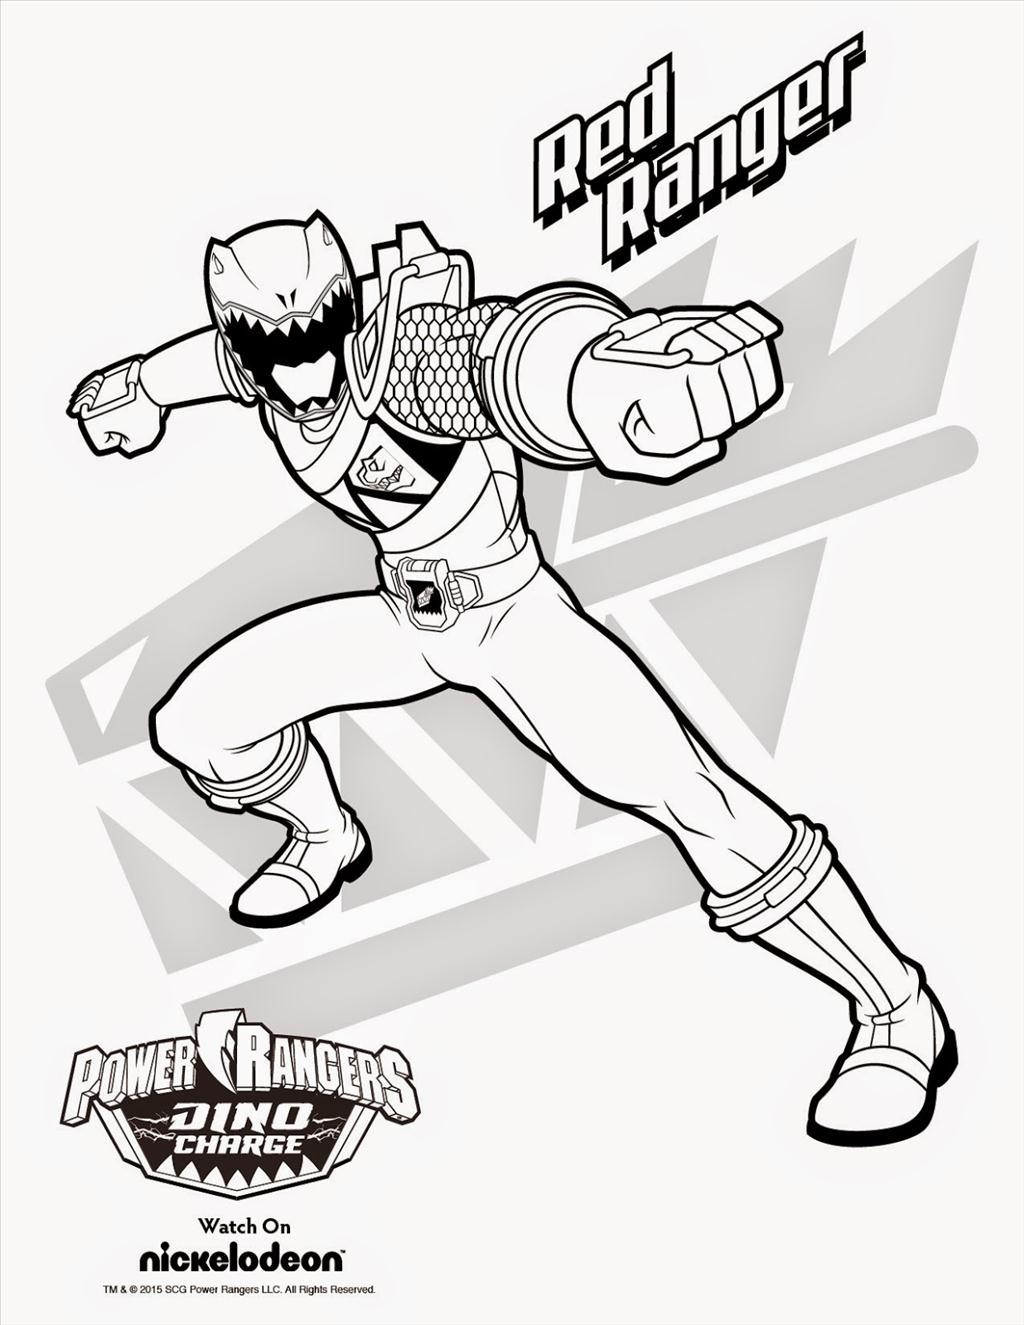 Original Power Rangers Coloring Pages at Free